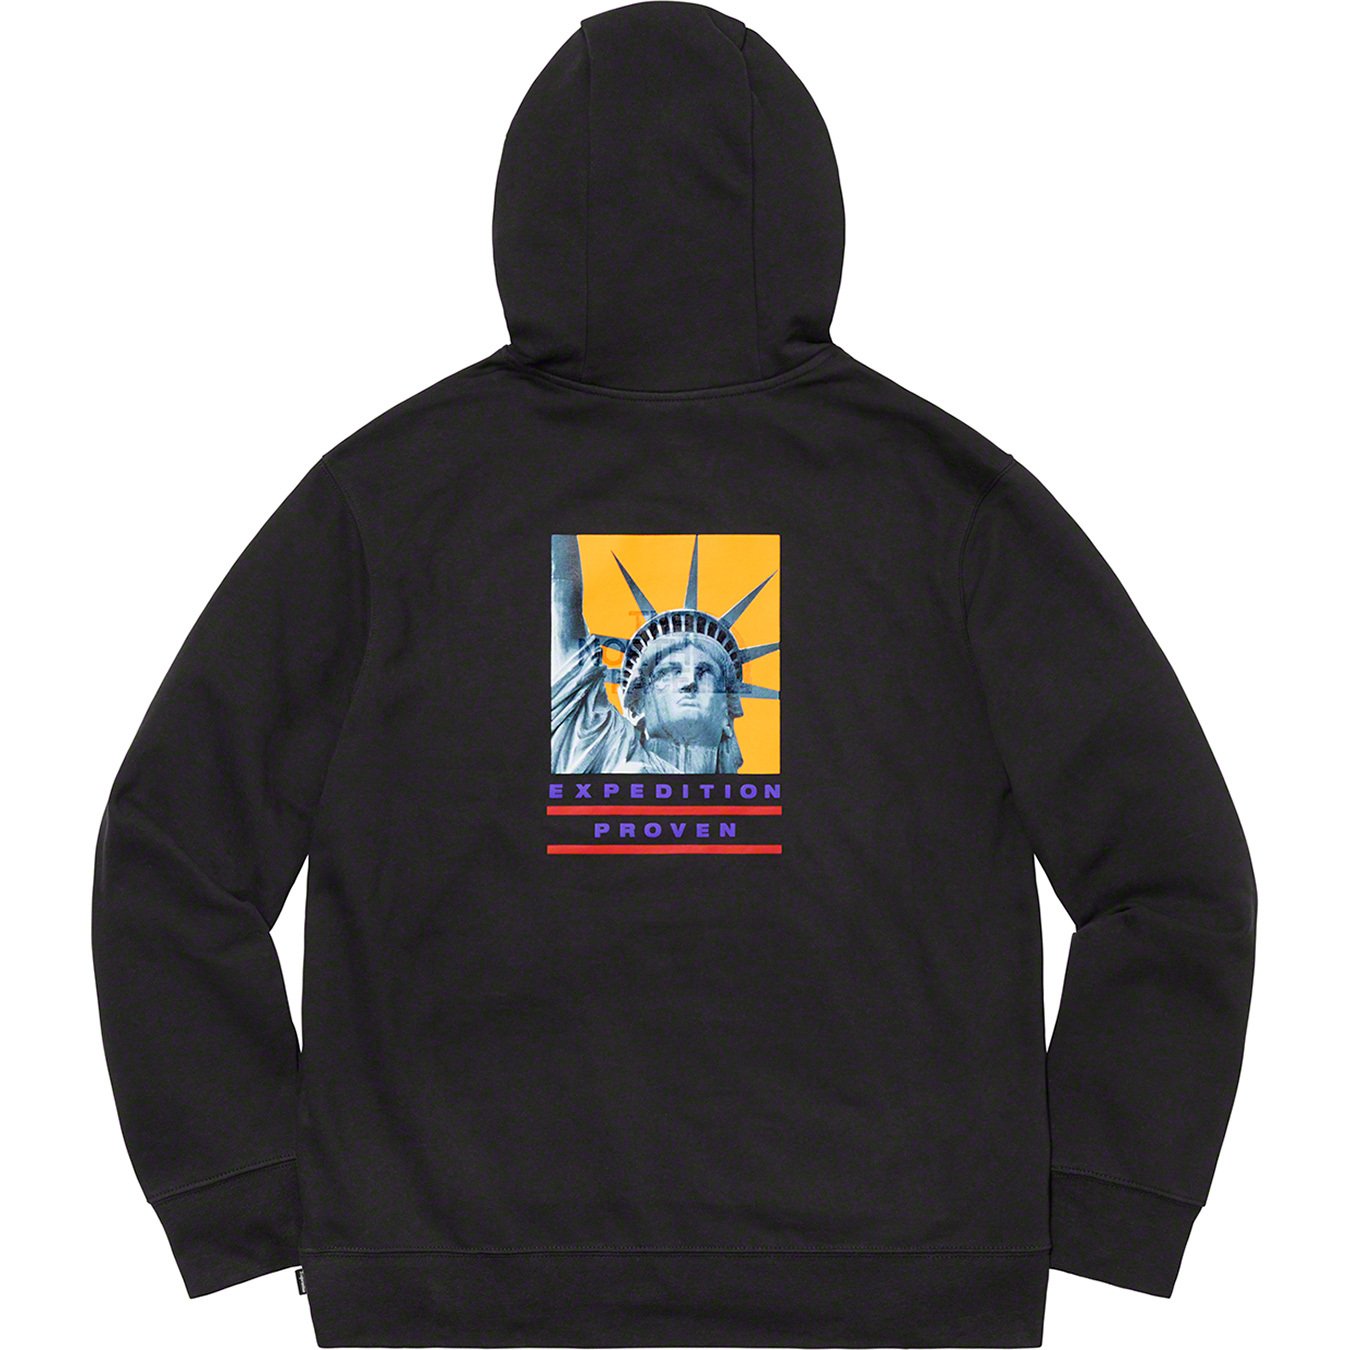 The North Face Statue of Liberty Hooded Sweatshirt - fall winter 